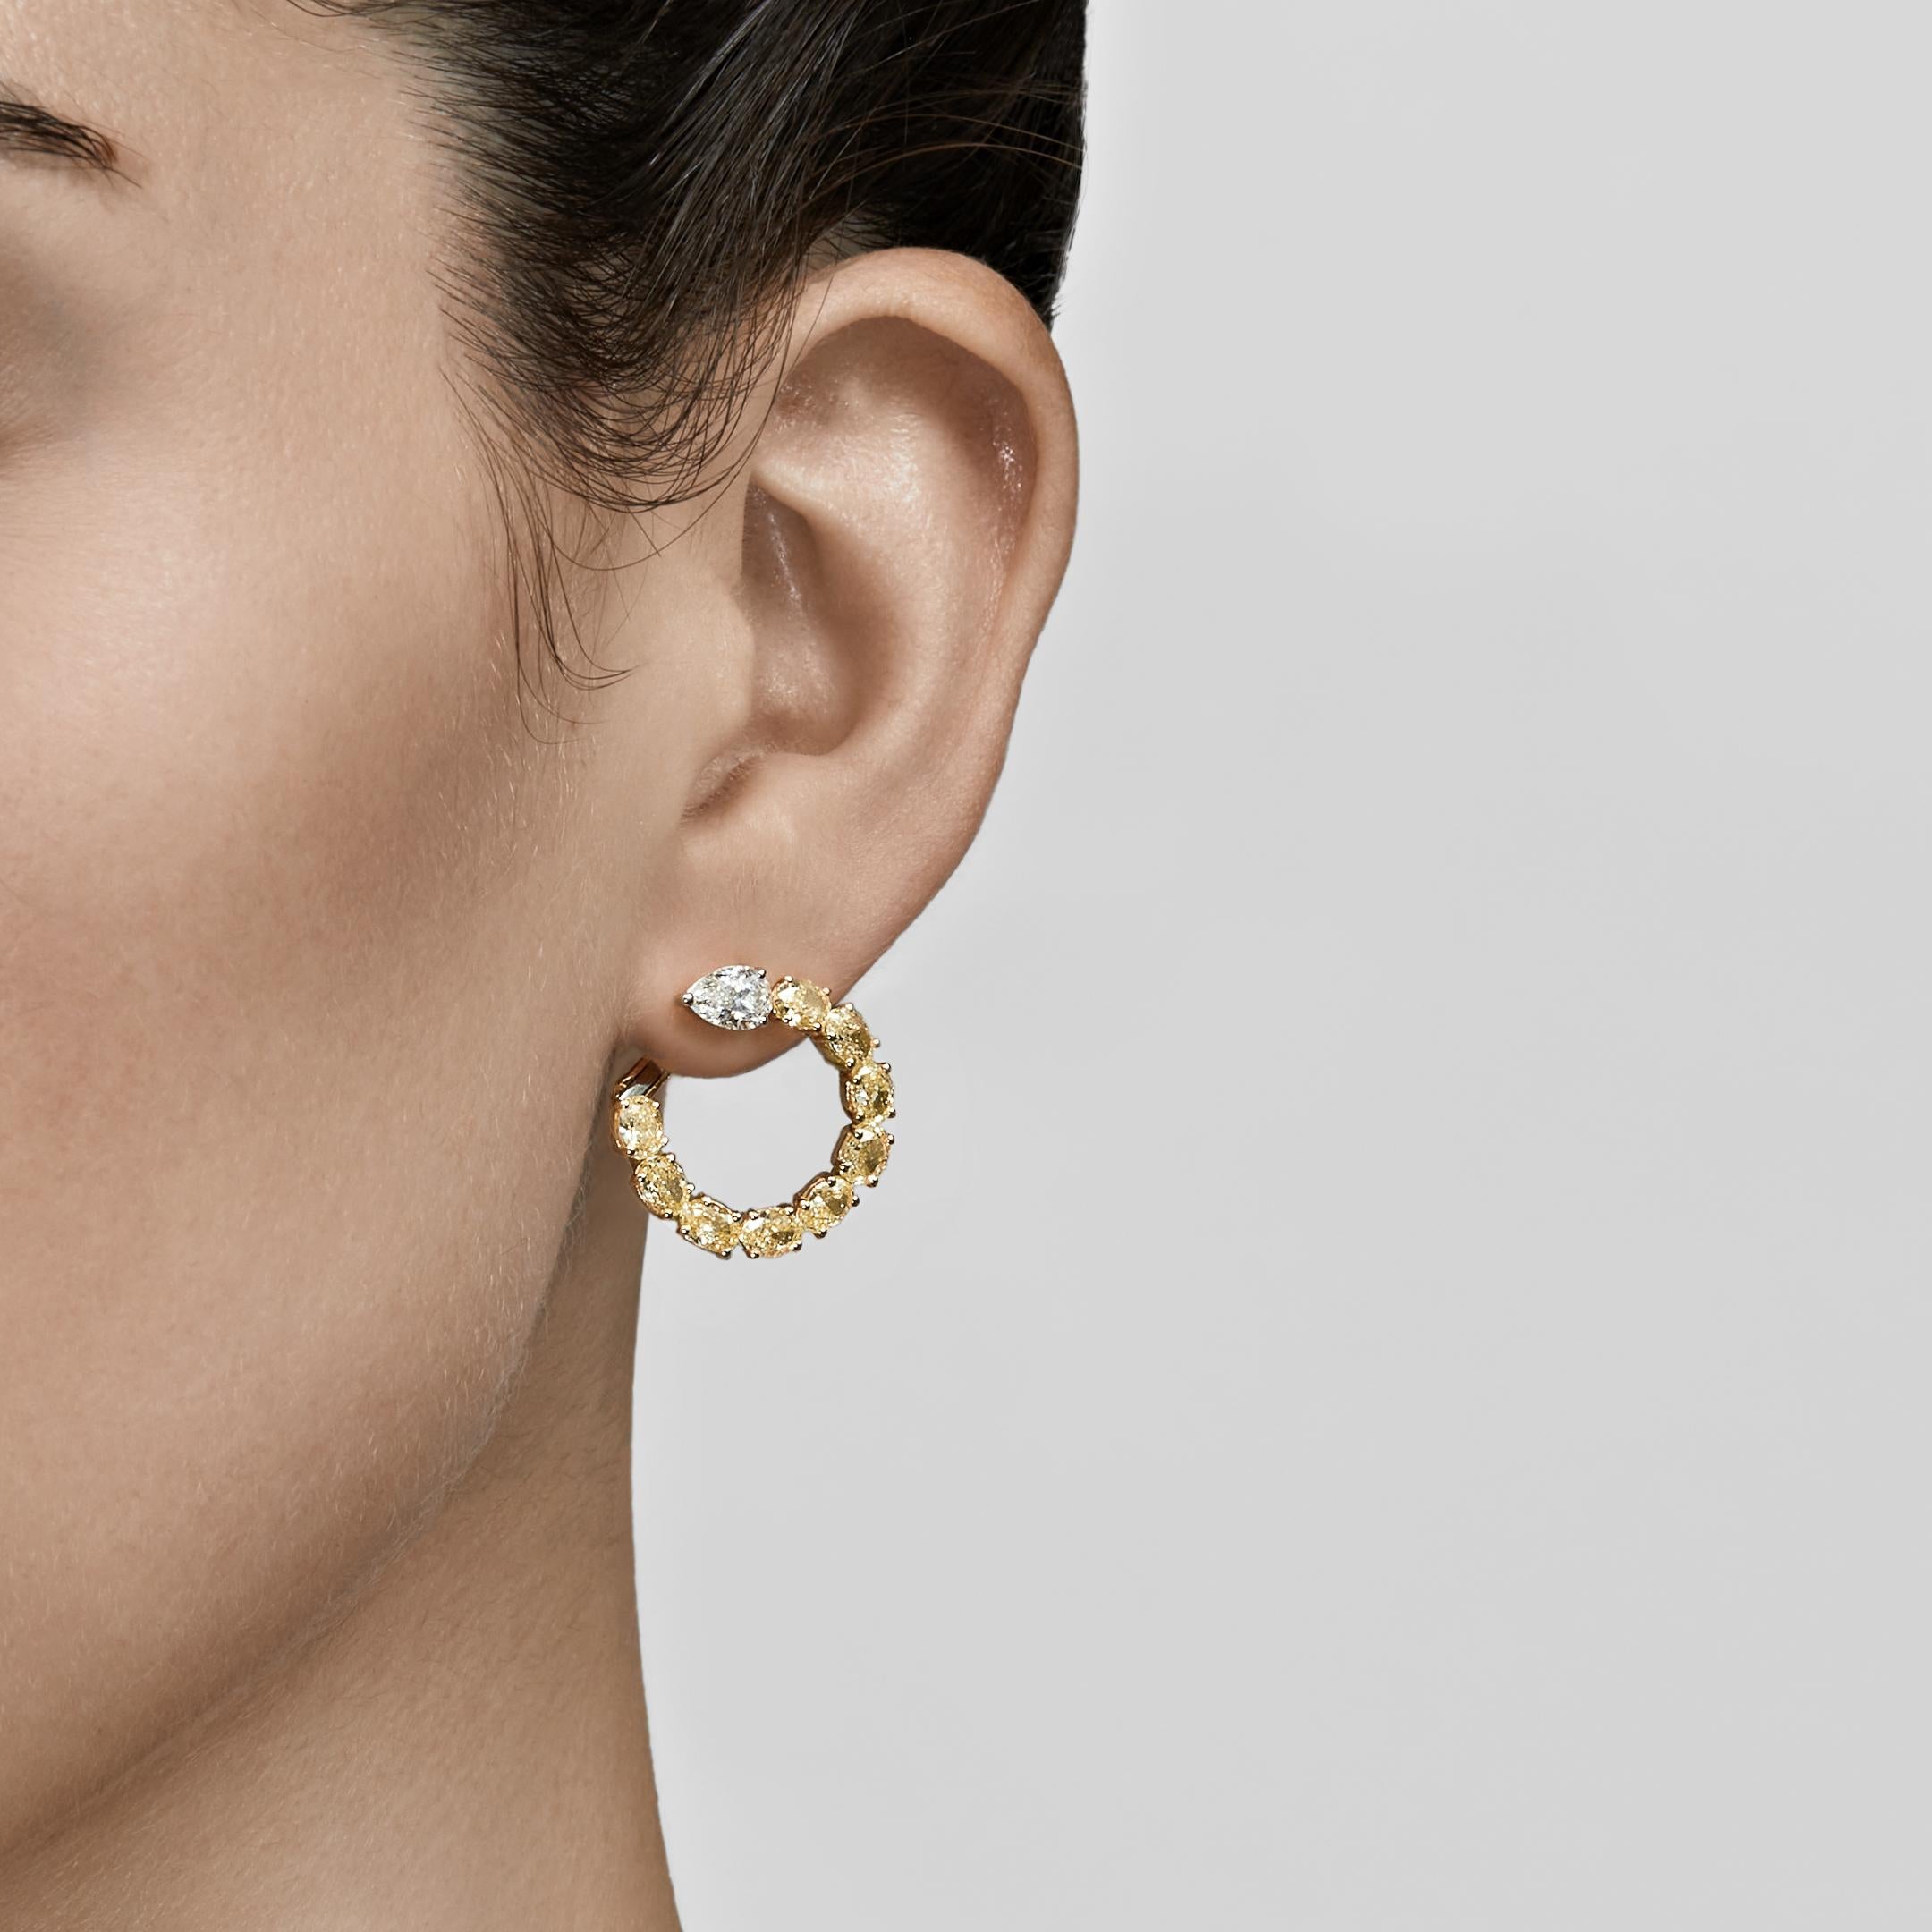 Hoop earrings are a fine jewelry necessity that works for so many occasions. Small huggie hoop lend polish to a humble errand run, while a large, luxurious pair becomes the focal point of your ensemble. These white and yellow diamond hoop earrings